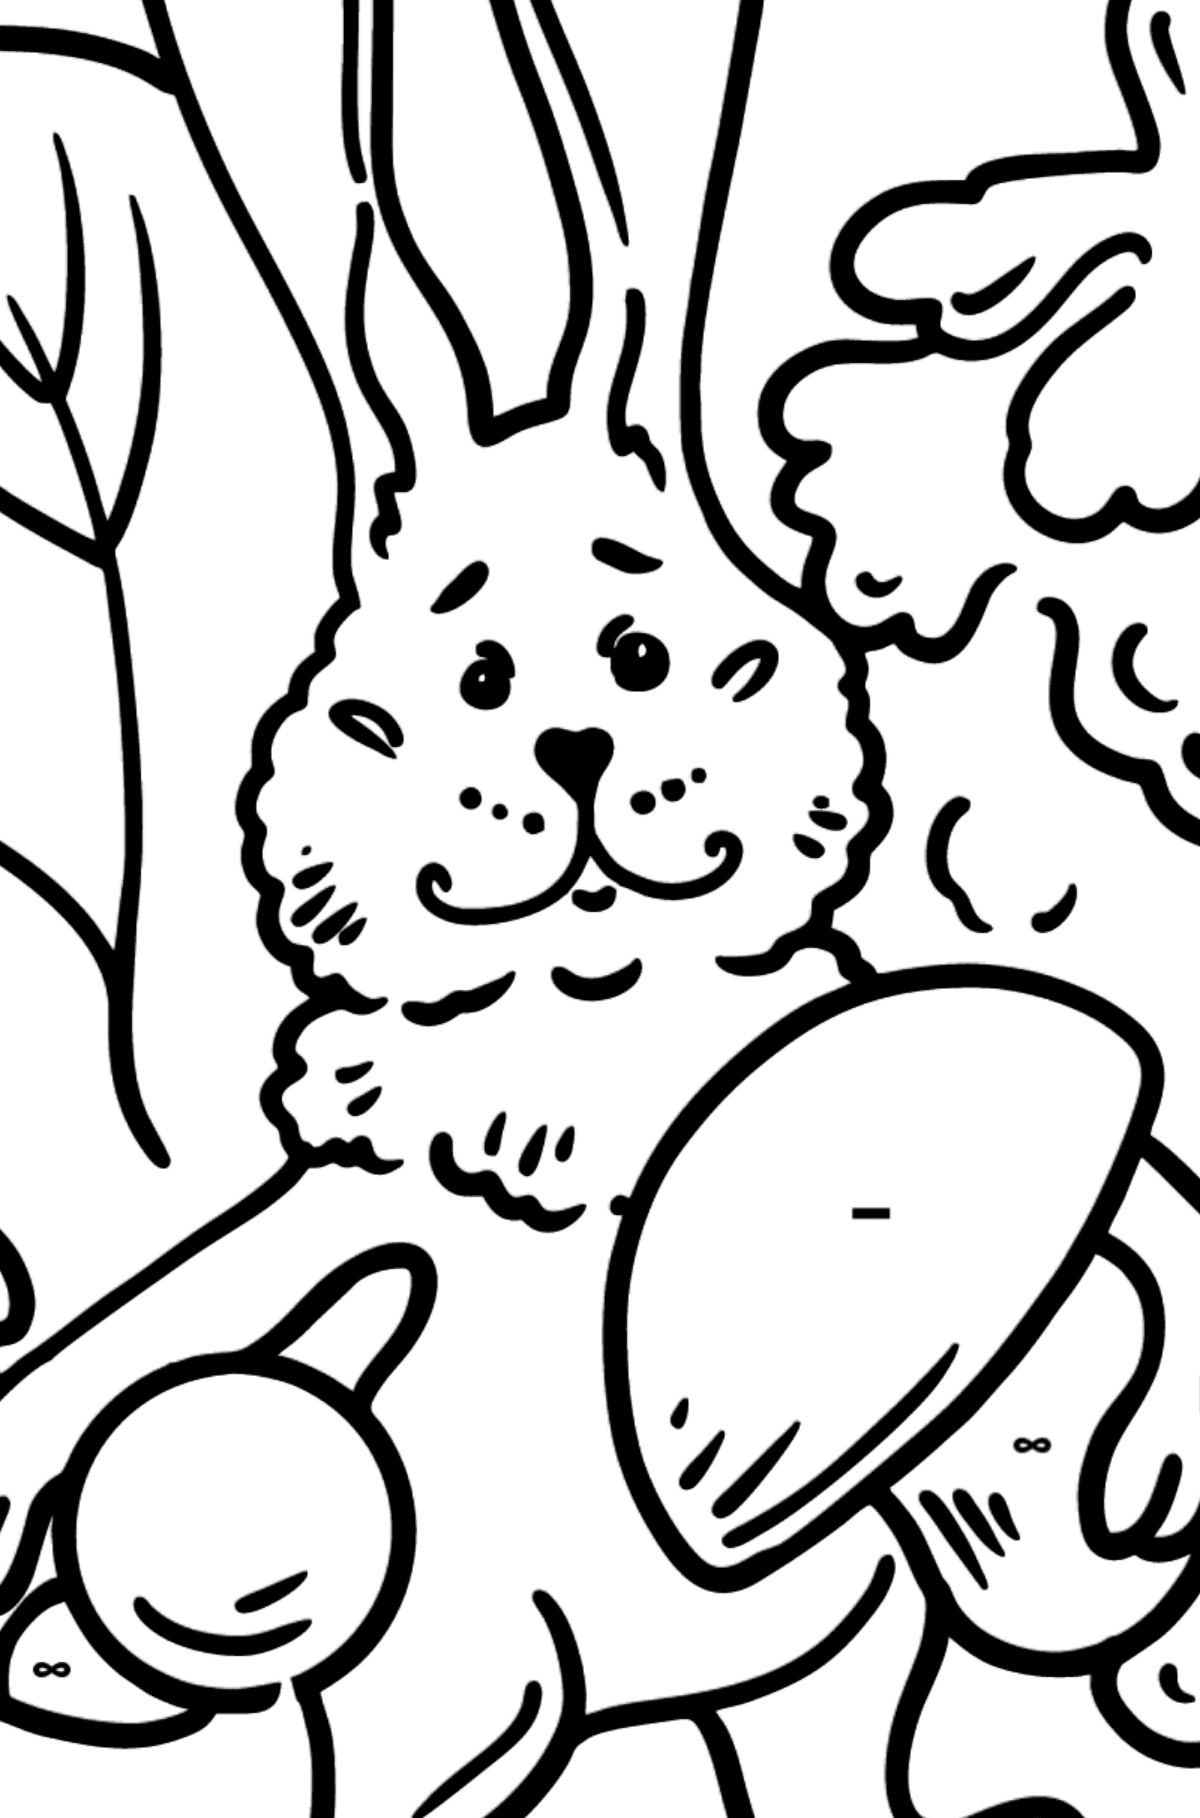 Bunny in the Forest coloring page - Coloring by Symbols and Geometric Shapes for Kids